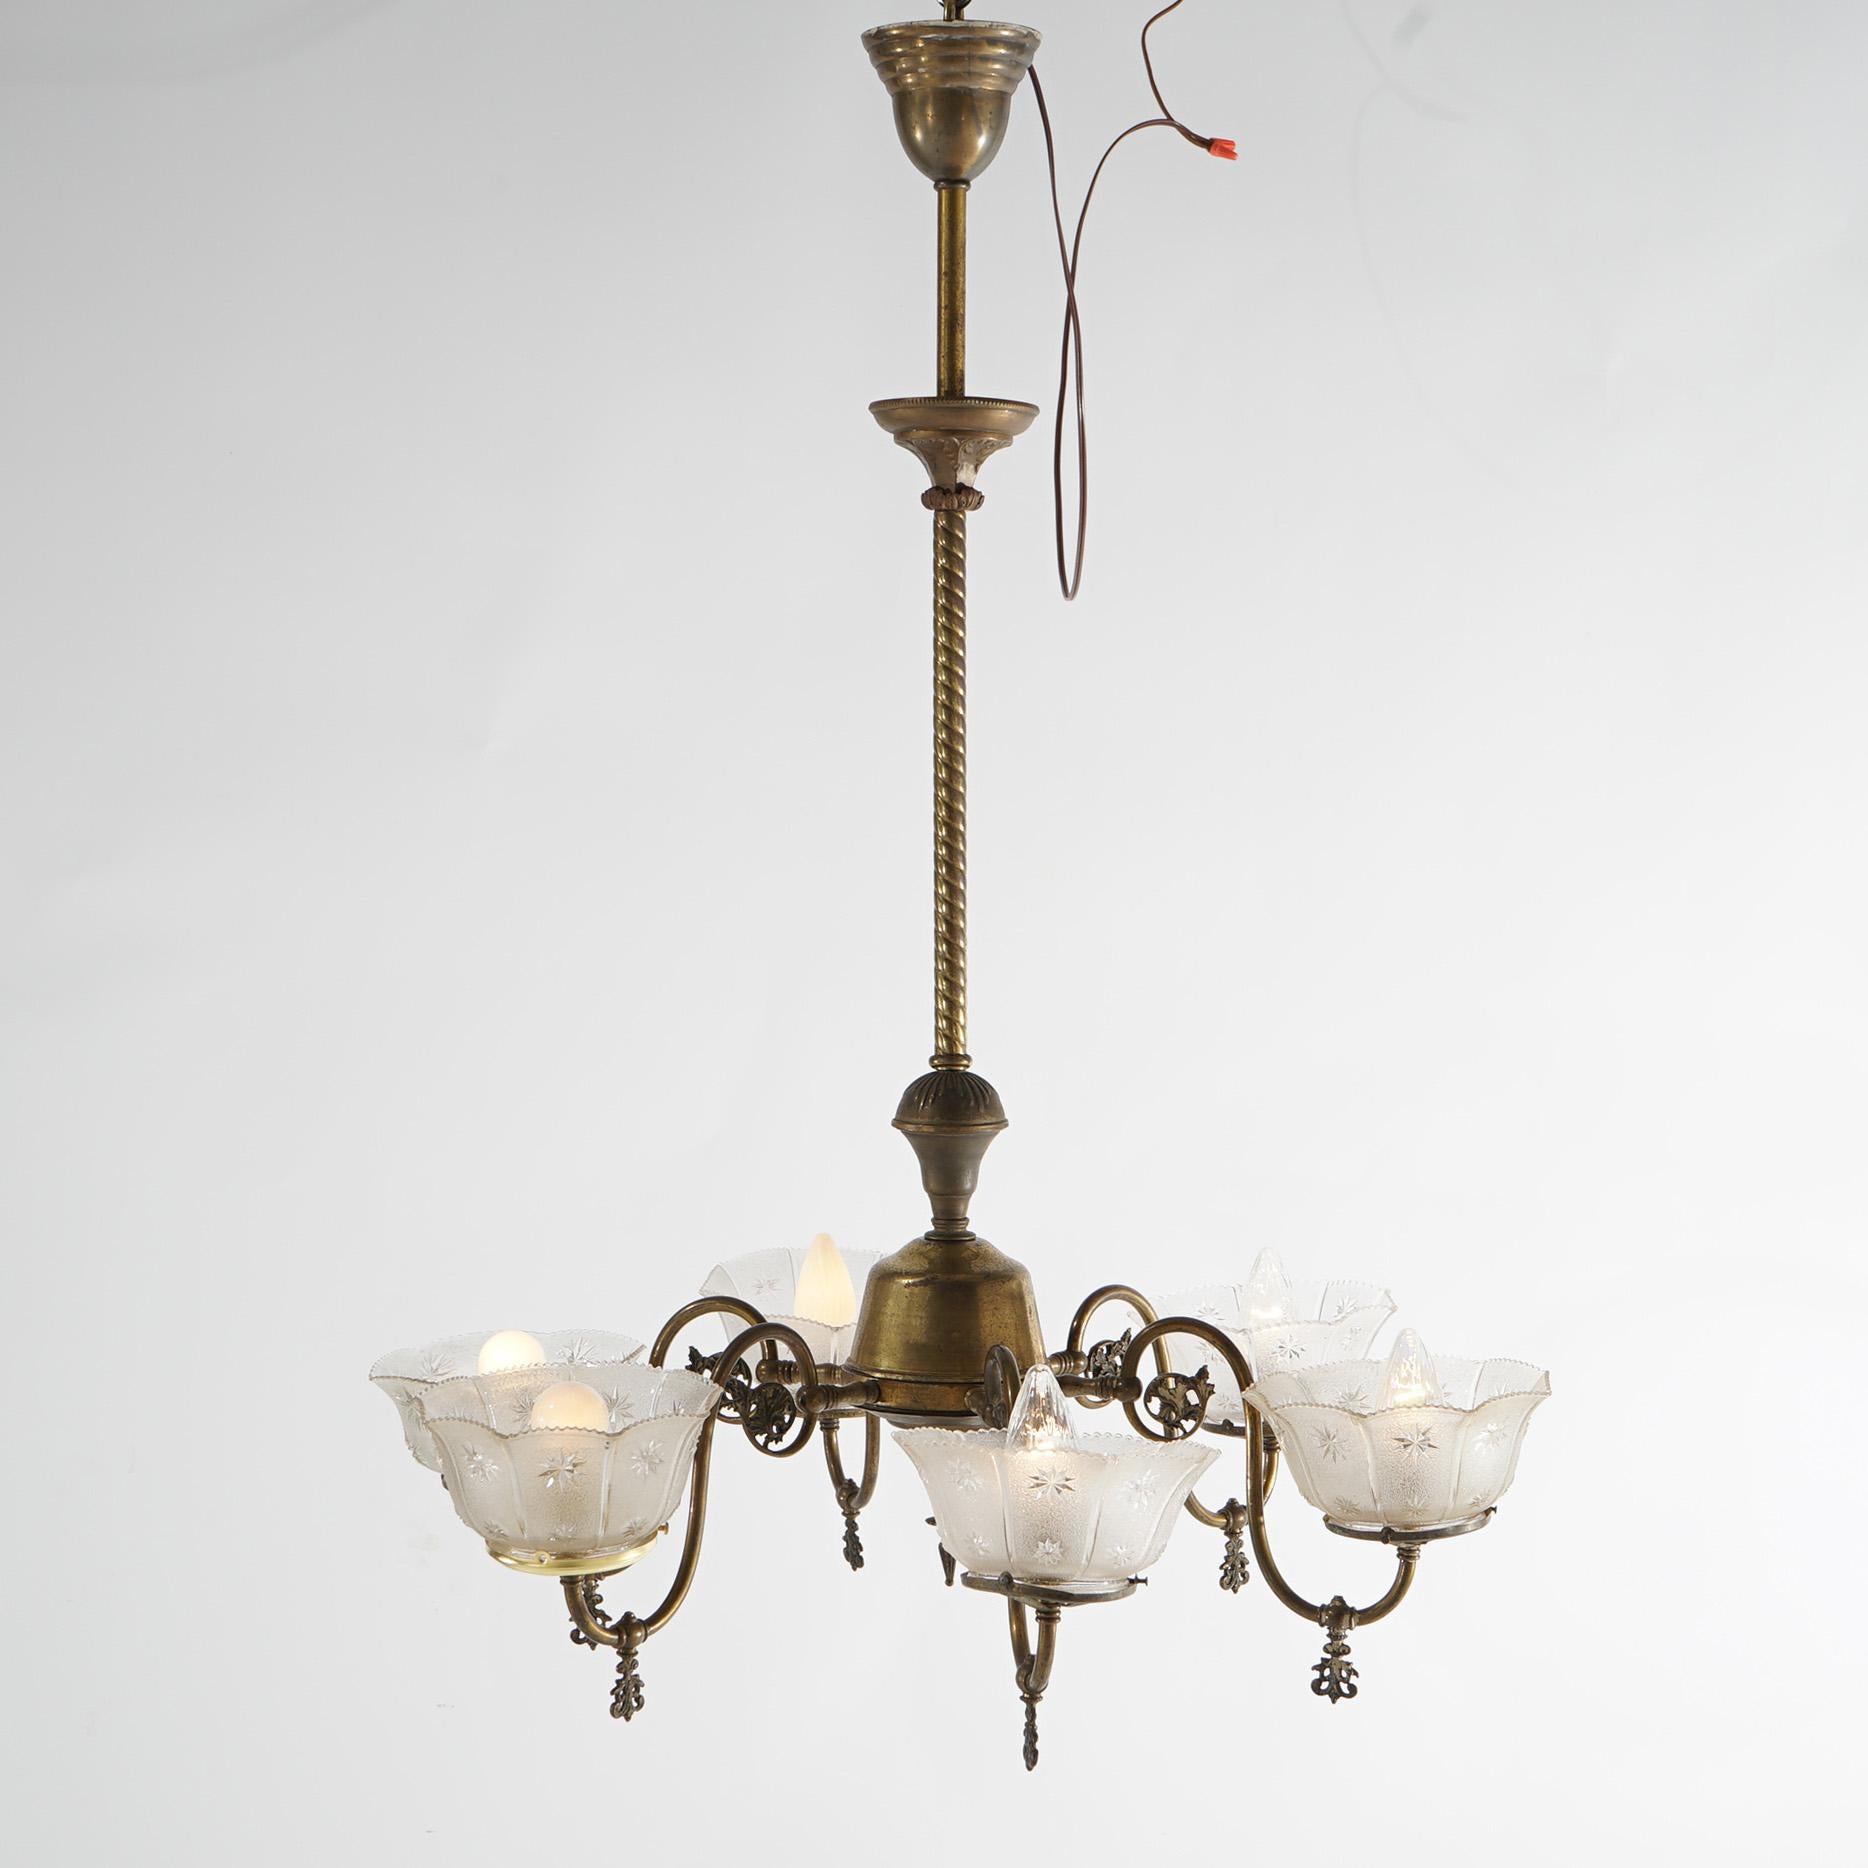 An antique electrified gas chandelier offers brass construction with six scroll form arms terminating in lights with glass shades, c1890

Measures - 41